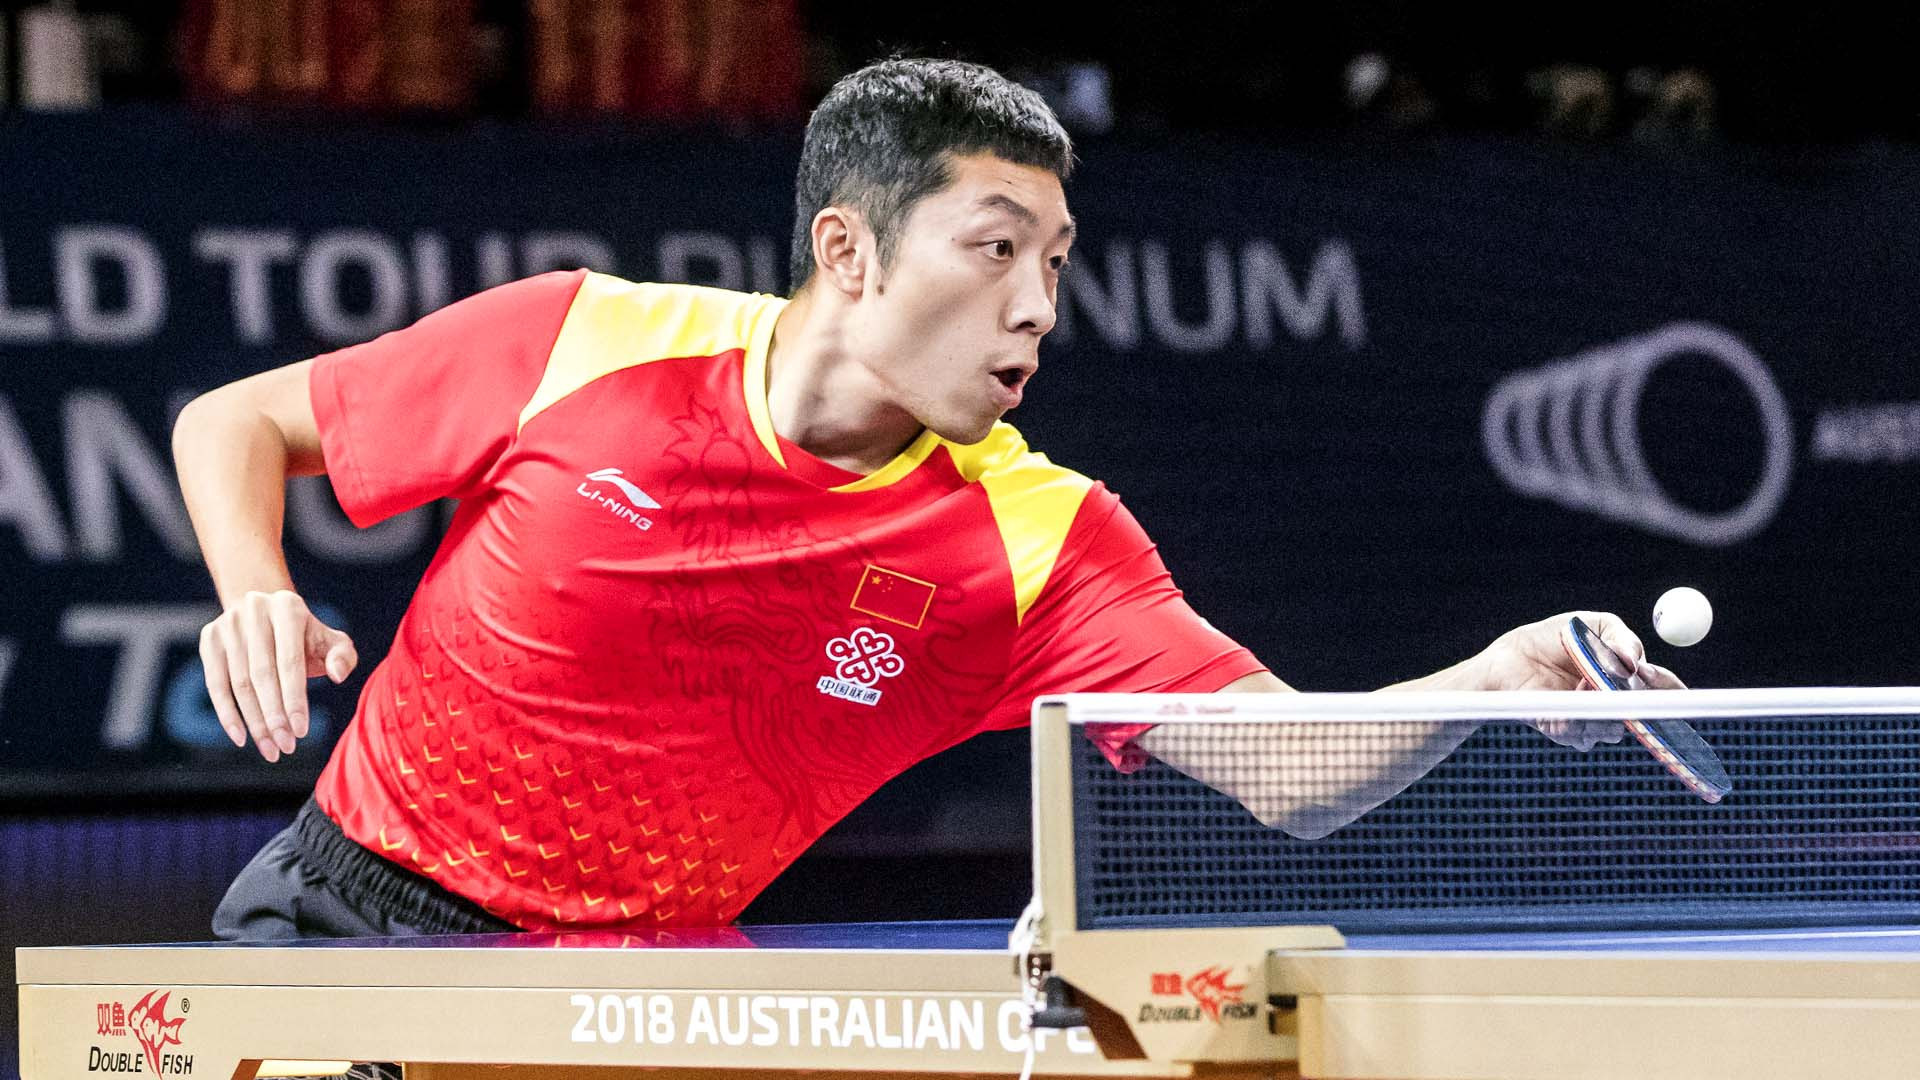 China's Xu Xin earned a morale-boosting victory in the men's final at the ITTF Australian Open in Geelong ©ITTF